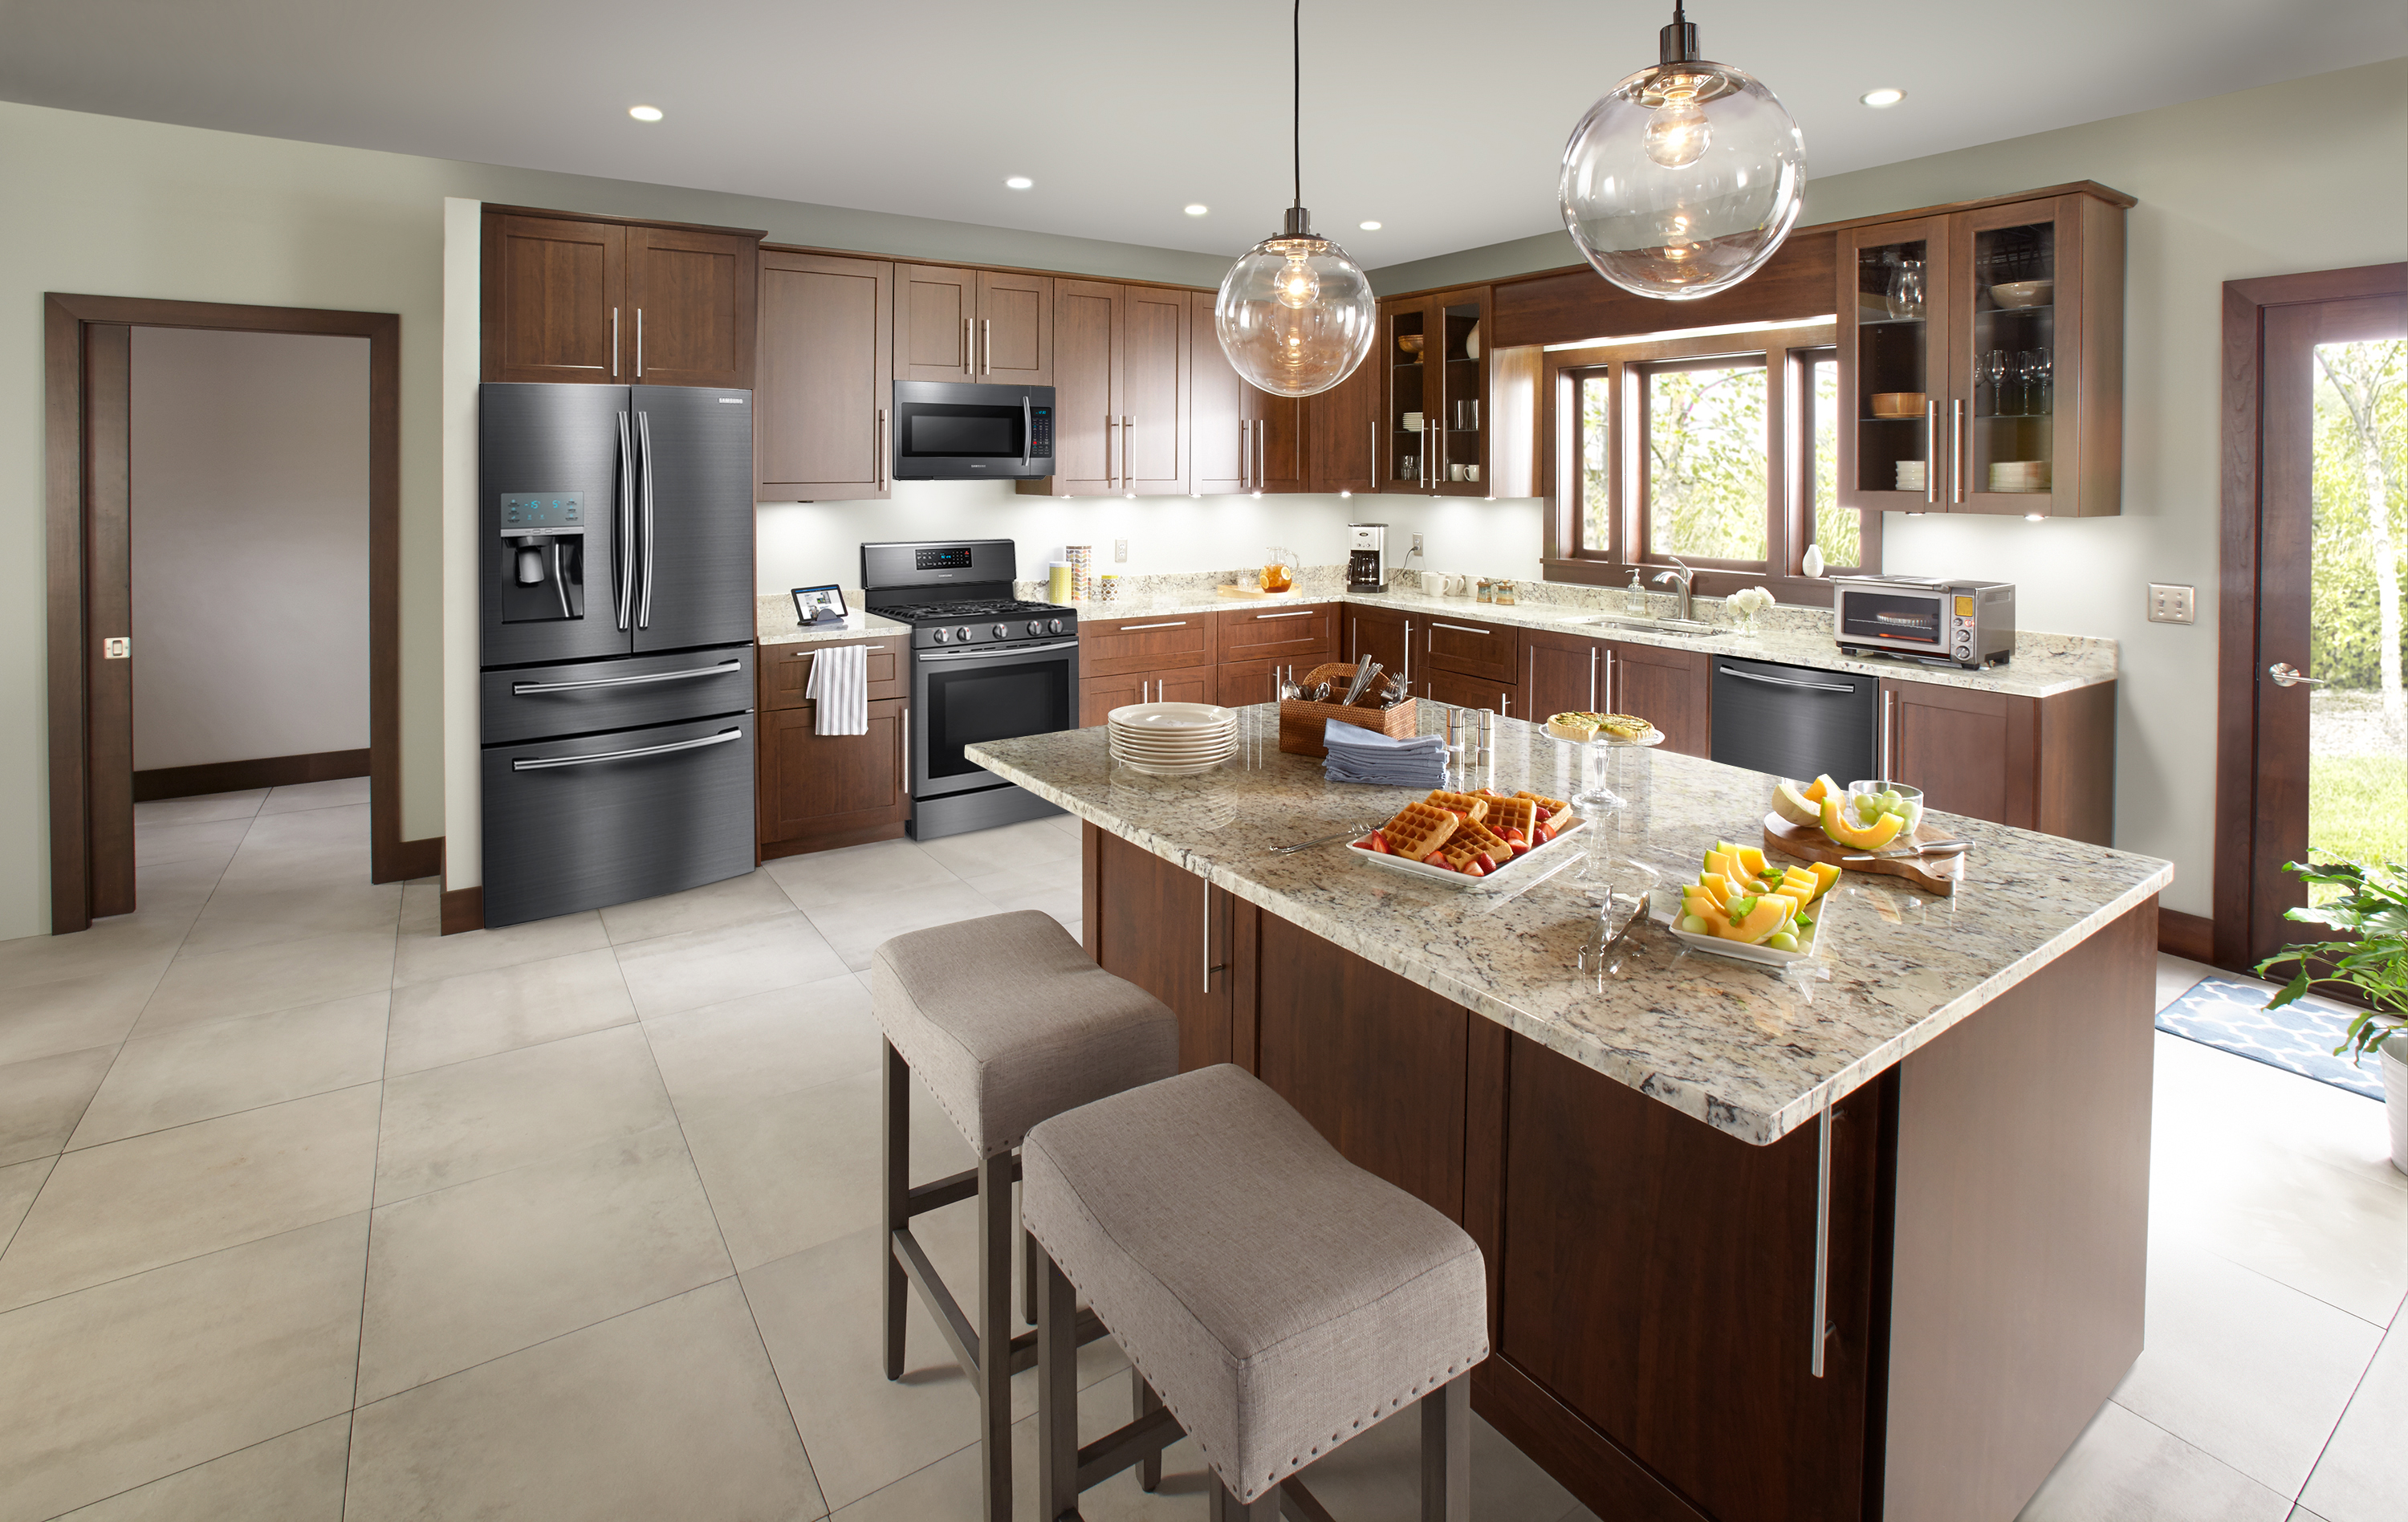 Remodel Your Kitchen with the Appliance Sales Event at Best Buy